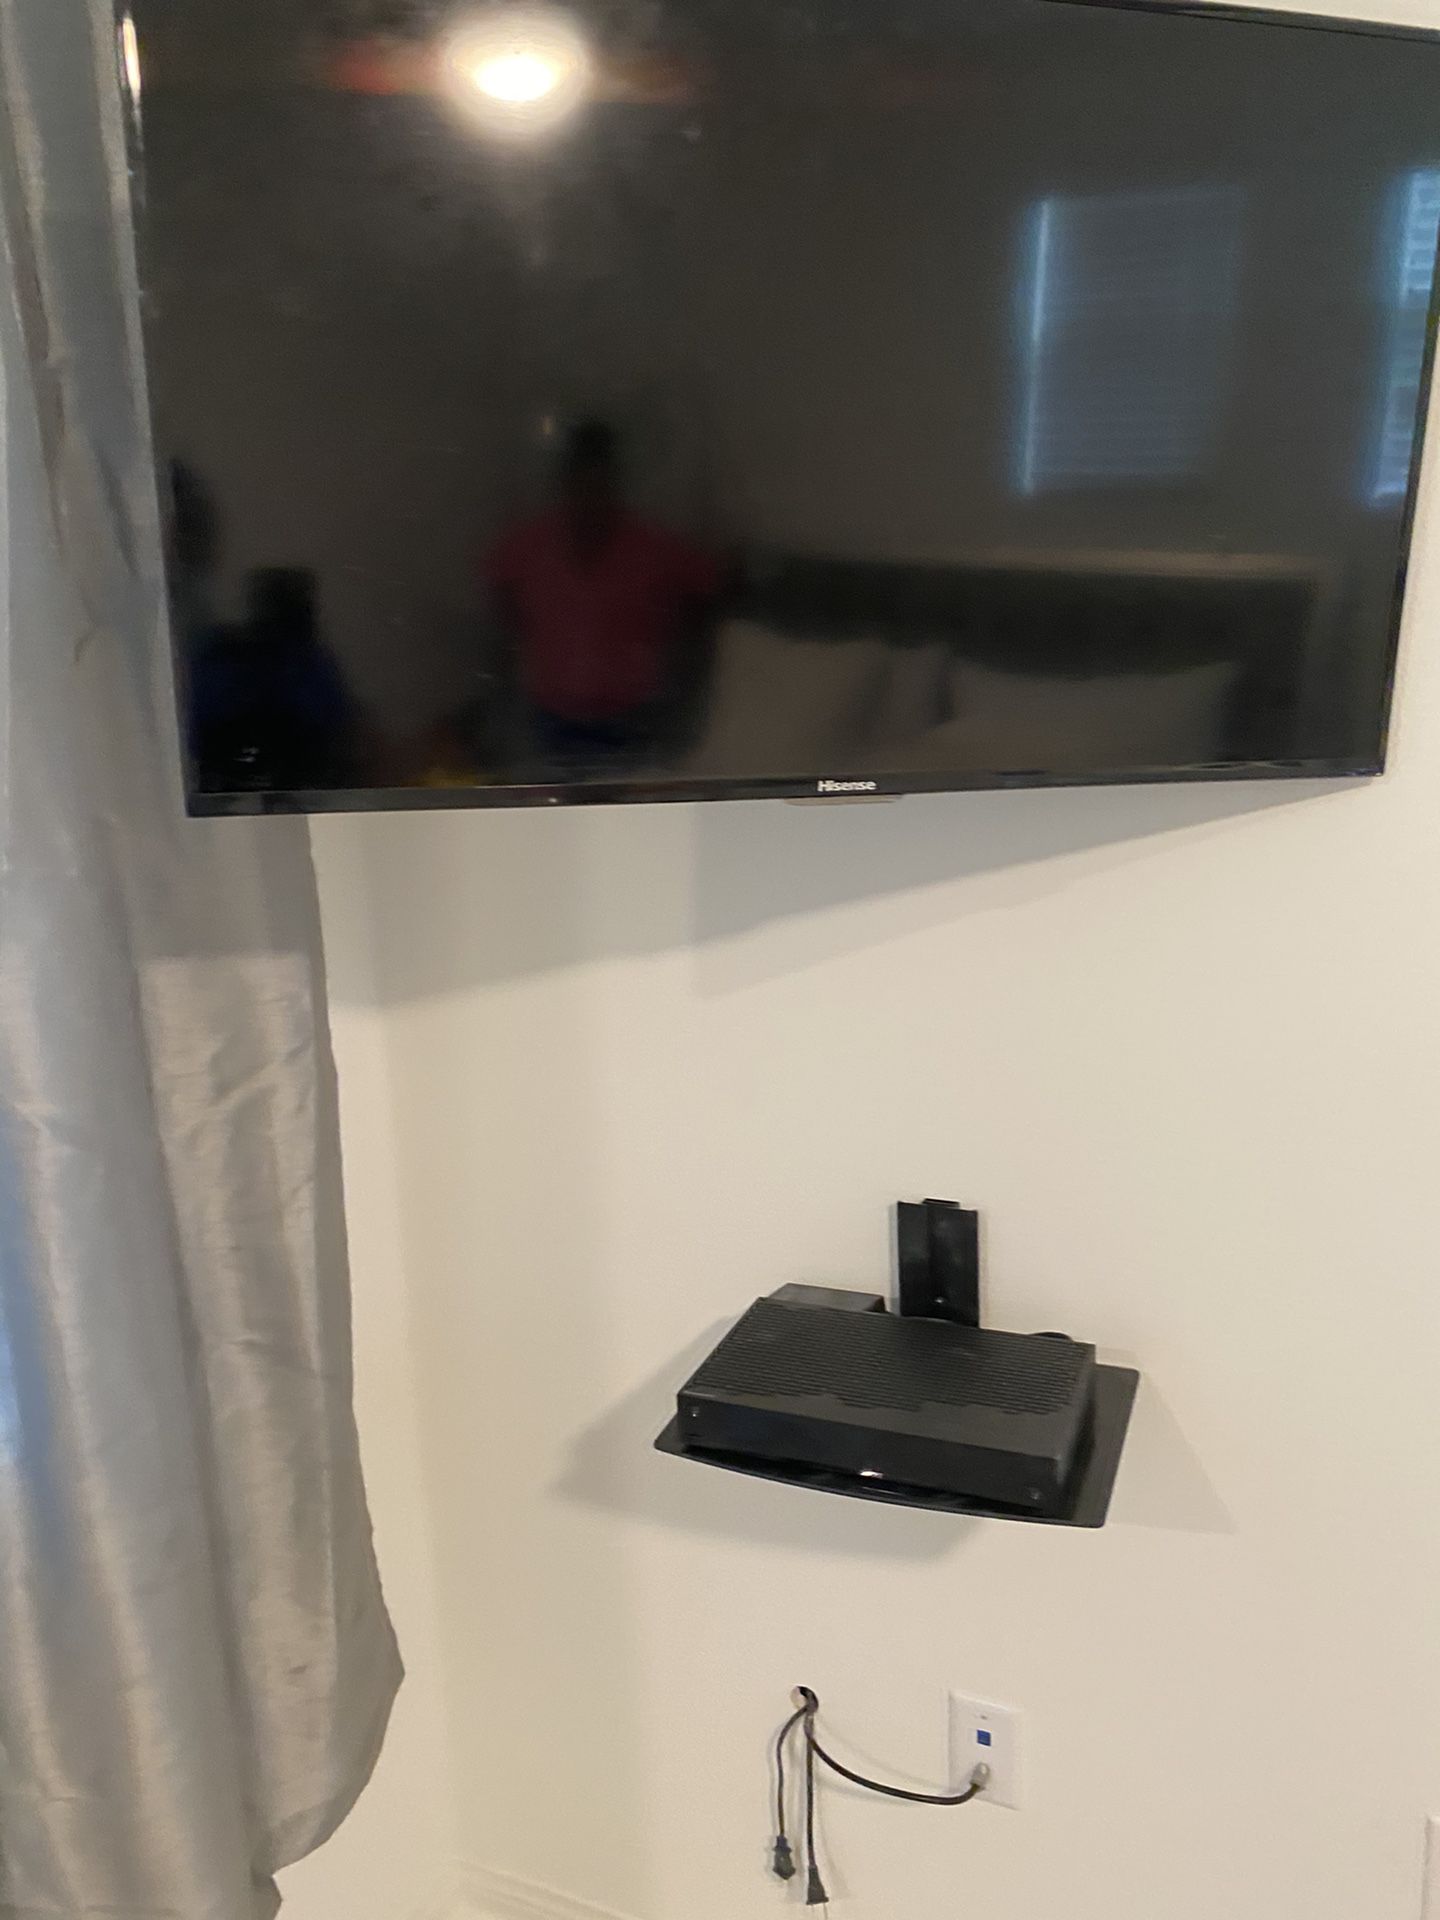 Tv mount for sale $60